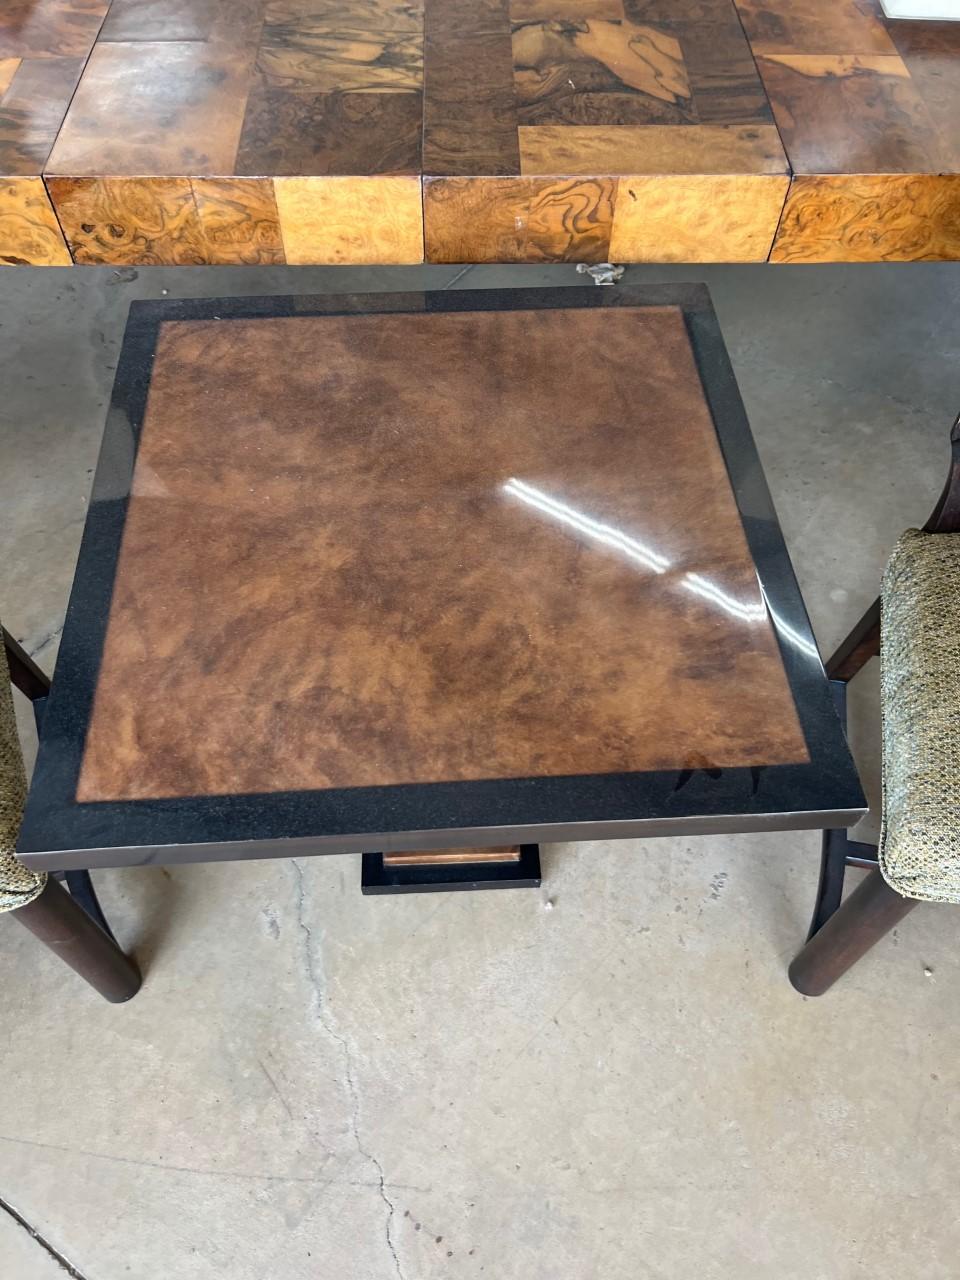 Elegant side table cover with goatskin and brass base

Parchment is natural color finish. 

(High gloss polyester resin filled finish).

Goatskin top coat matte 

Color brown and dark charcoal

Brass finish crystal coated.